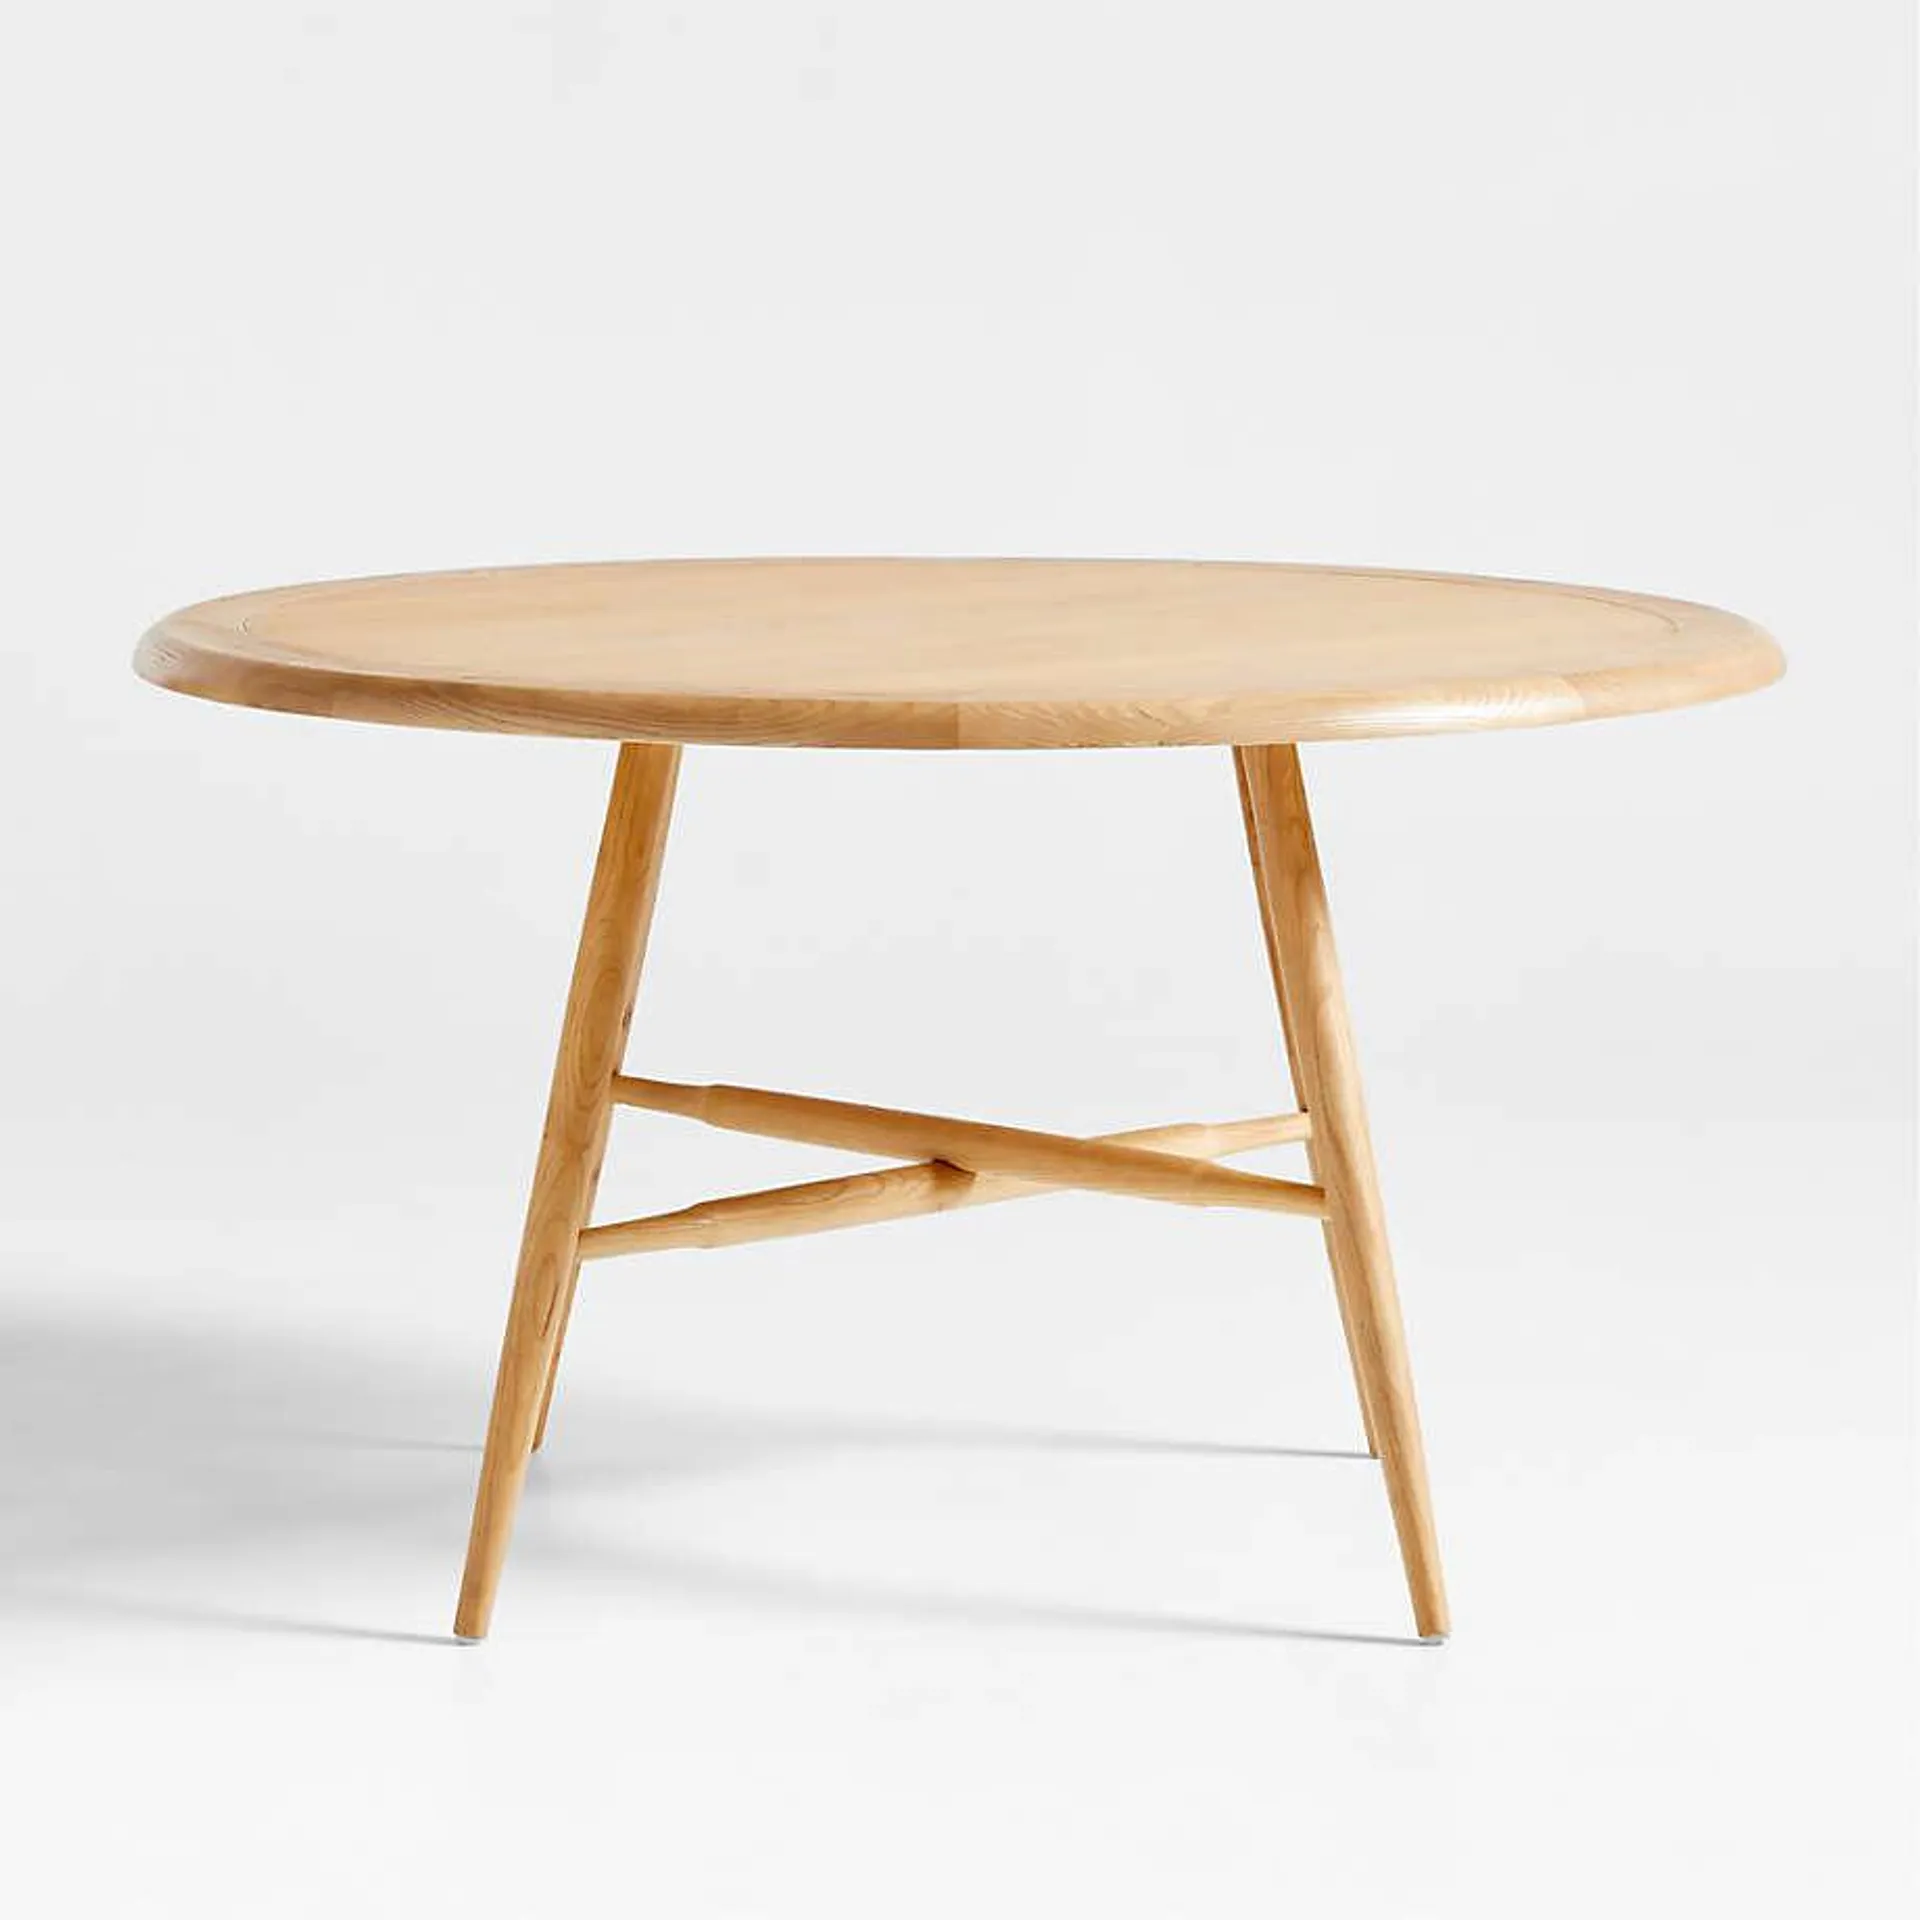 Malin 54" Round Wood Dining Table